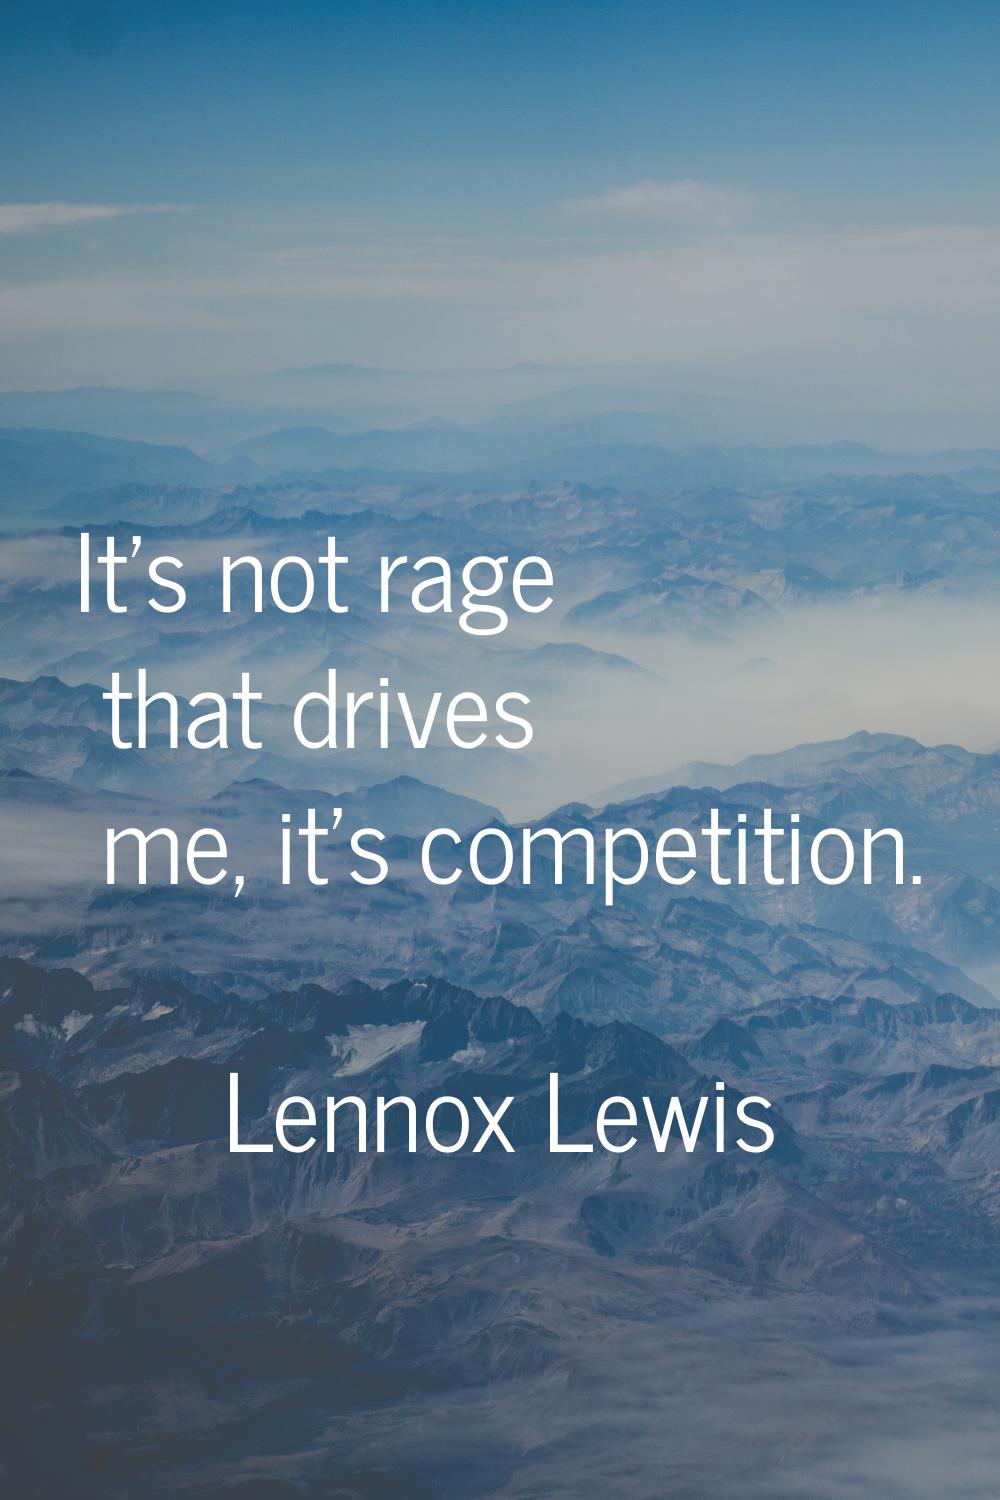 It's not rage that drives me, it's competition.